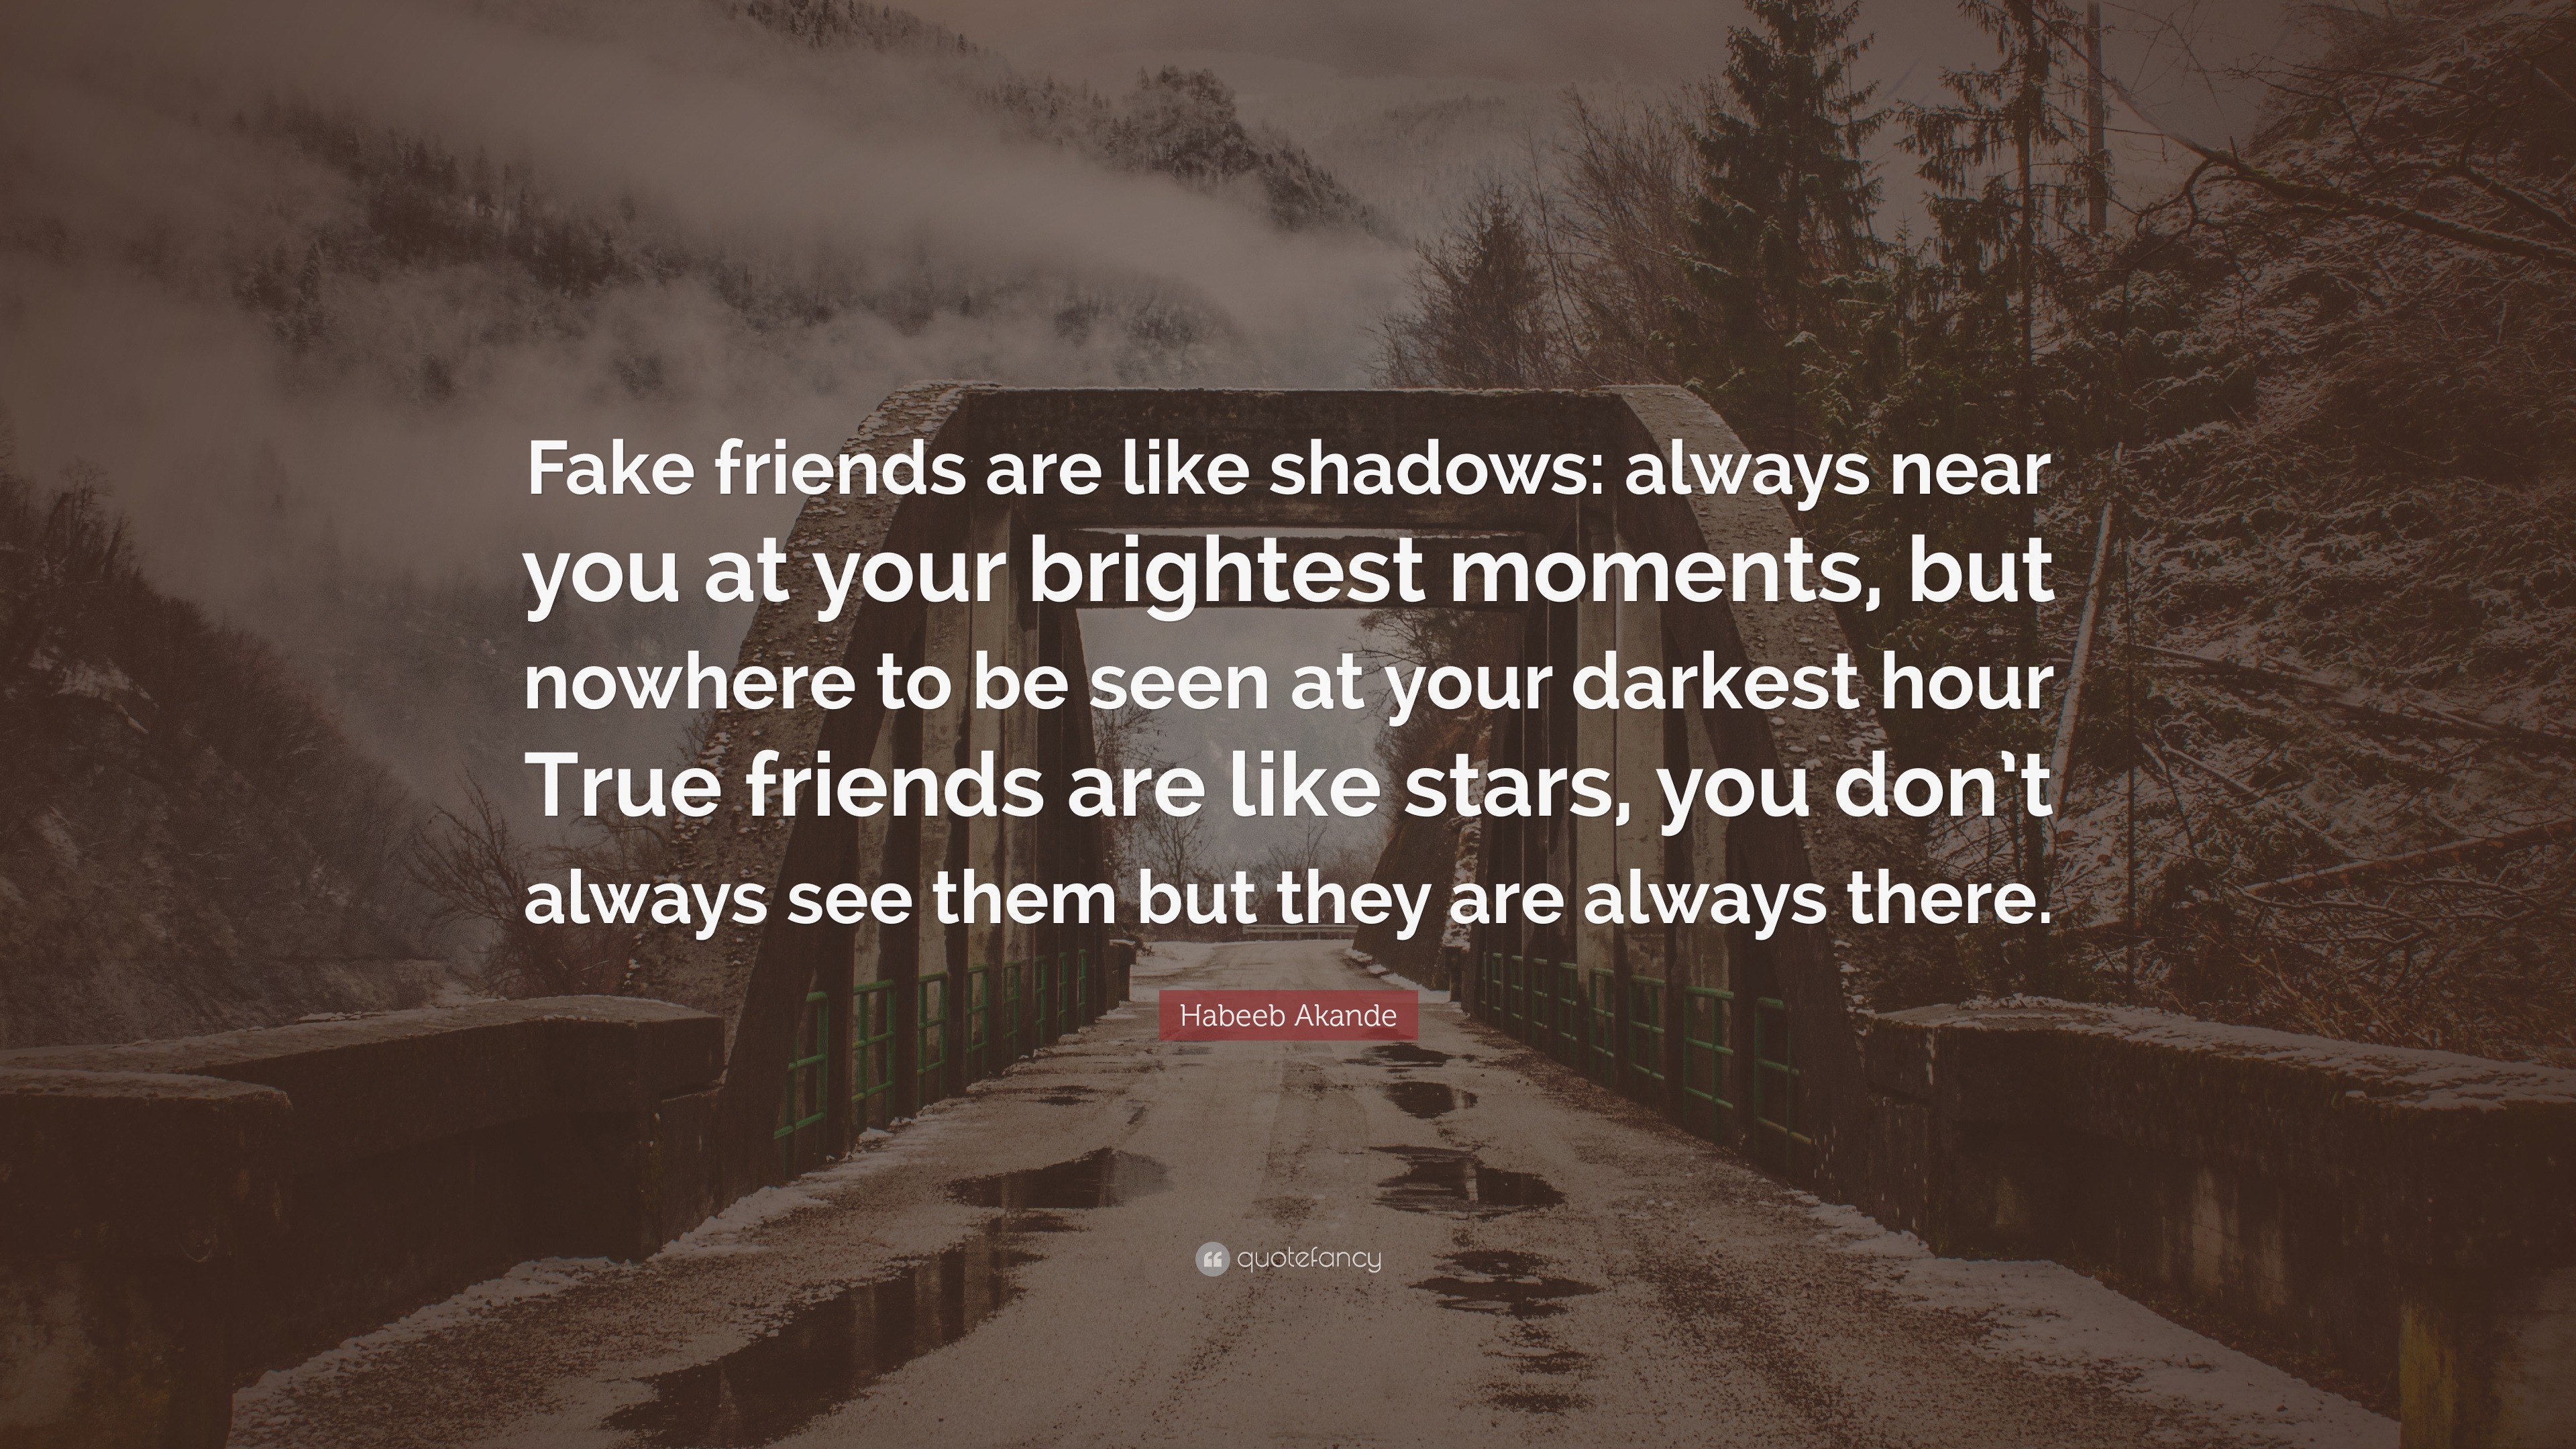 Habeeb Akande Quote: “Fake friends are like shadows: always near you at ...